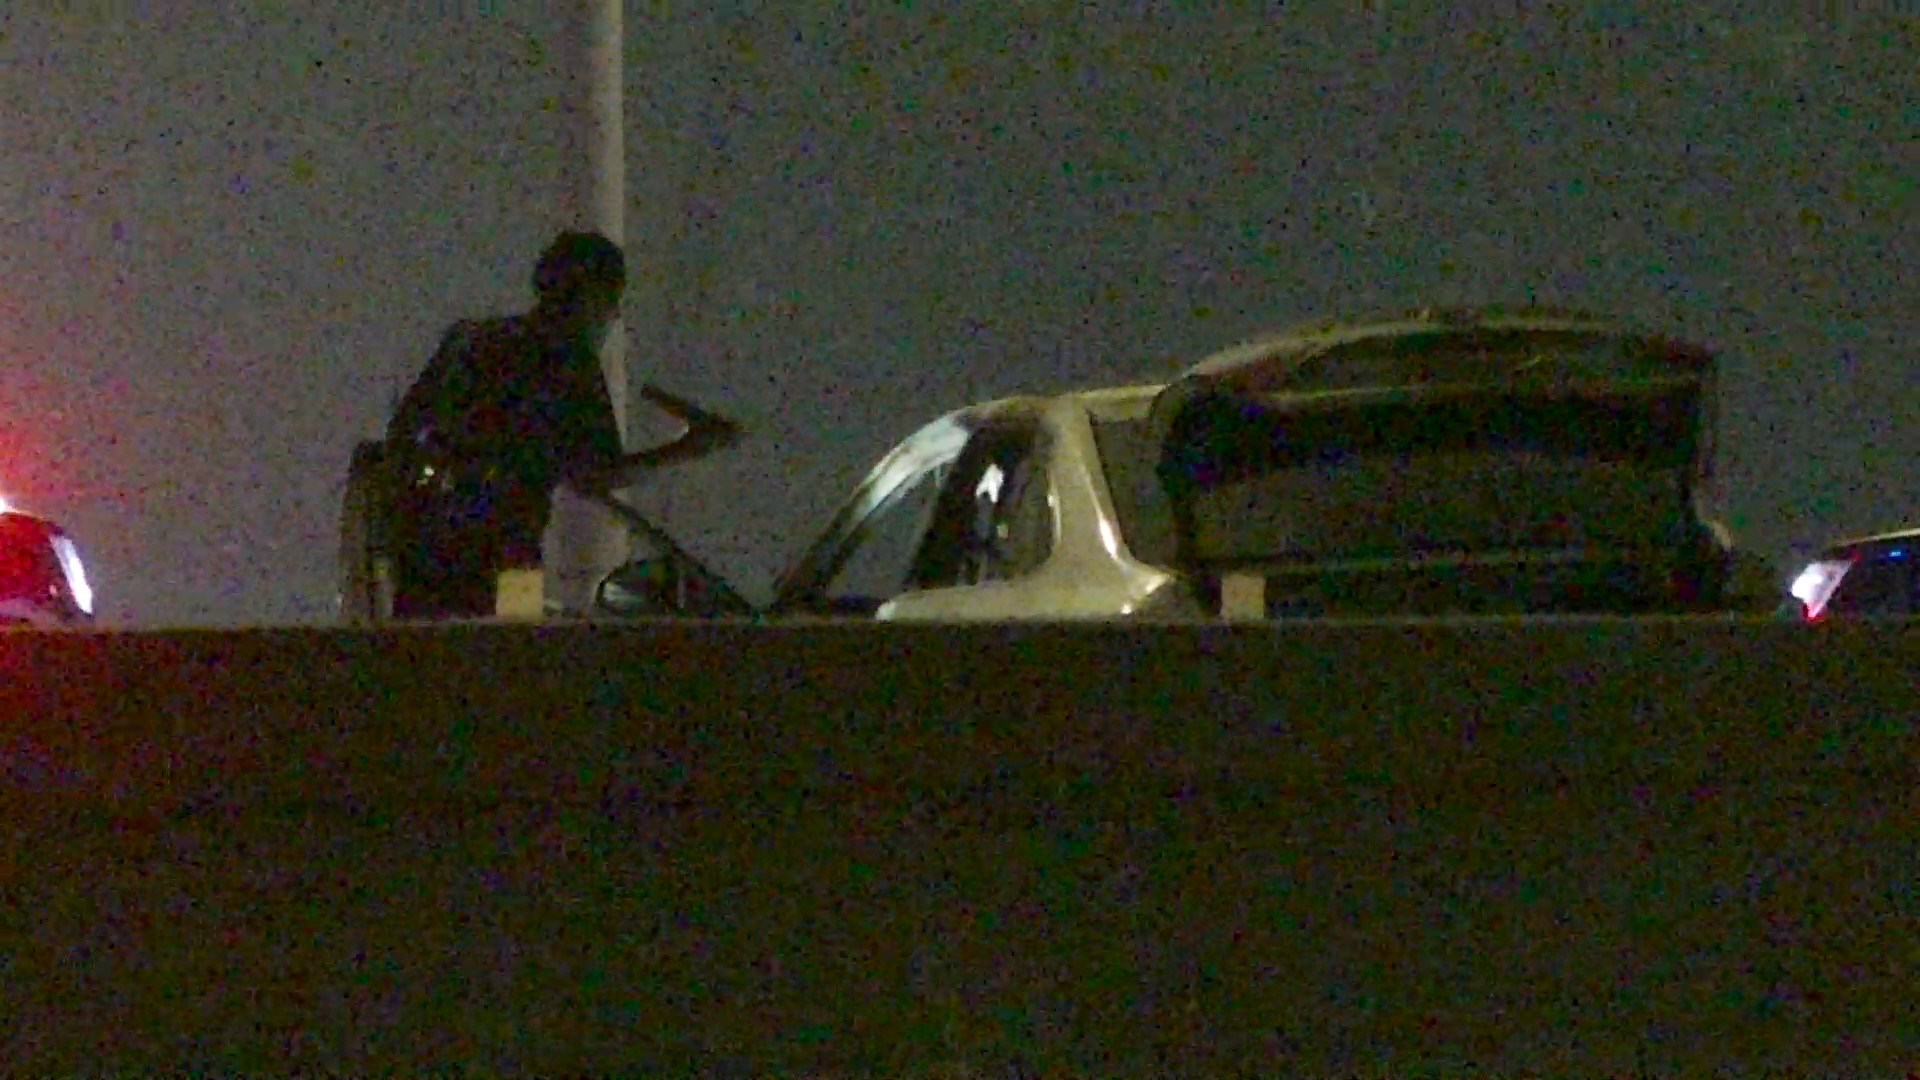 The tollway reopened just before 6:30 a.m. Friday after being closed for more than two hours.